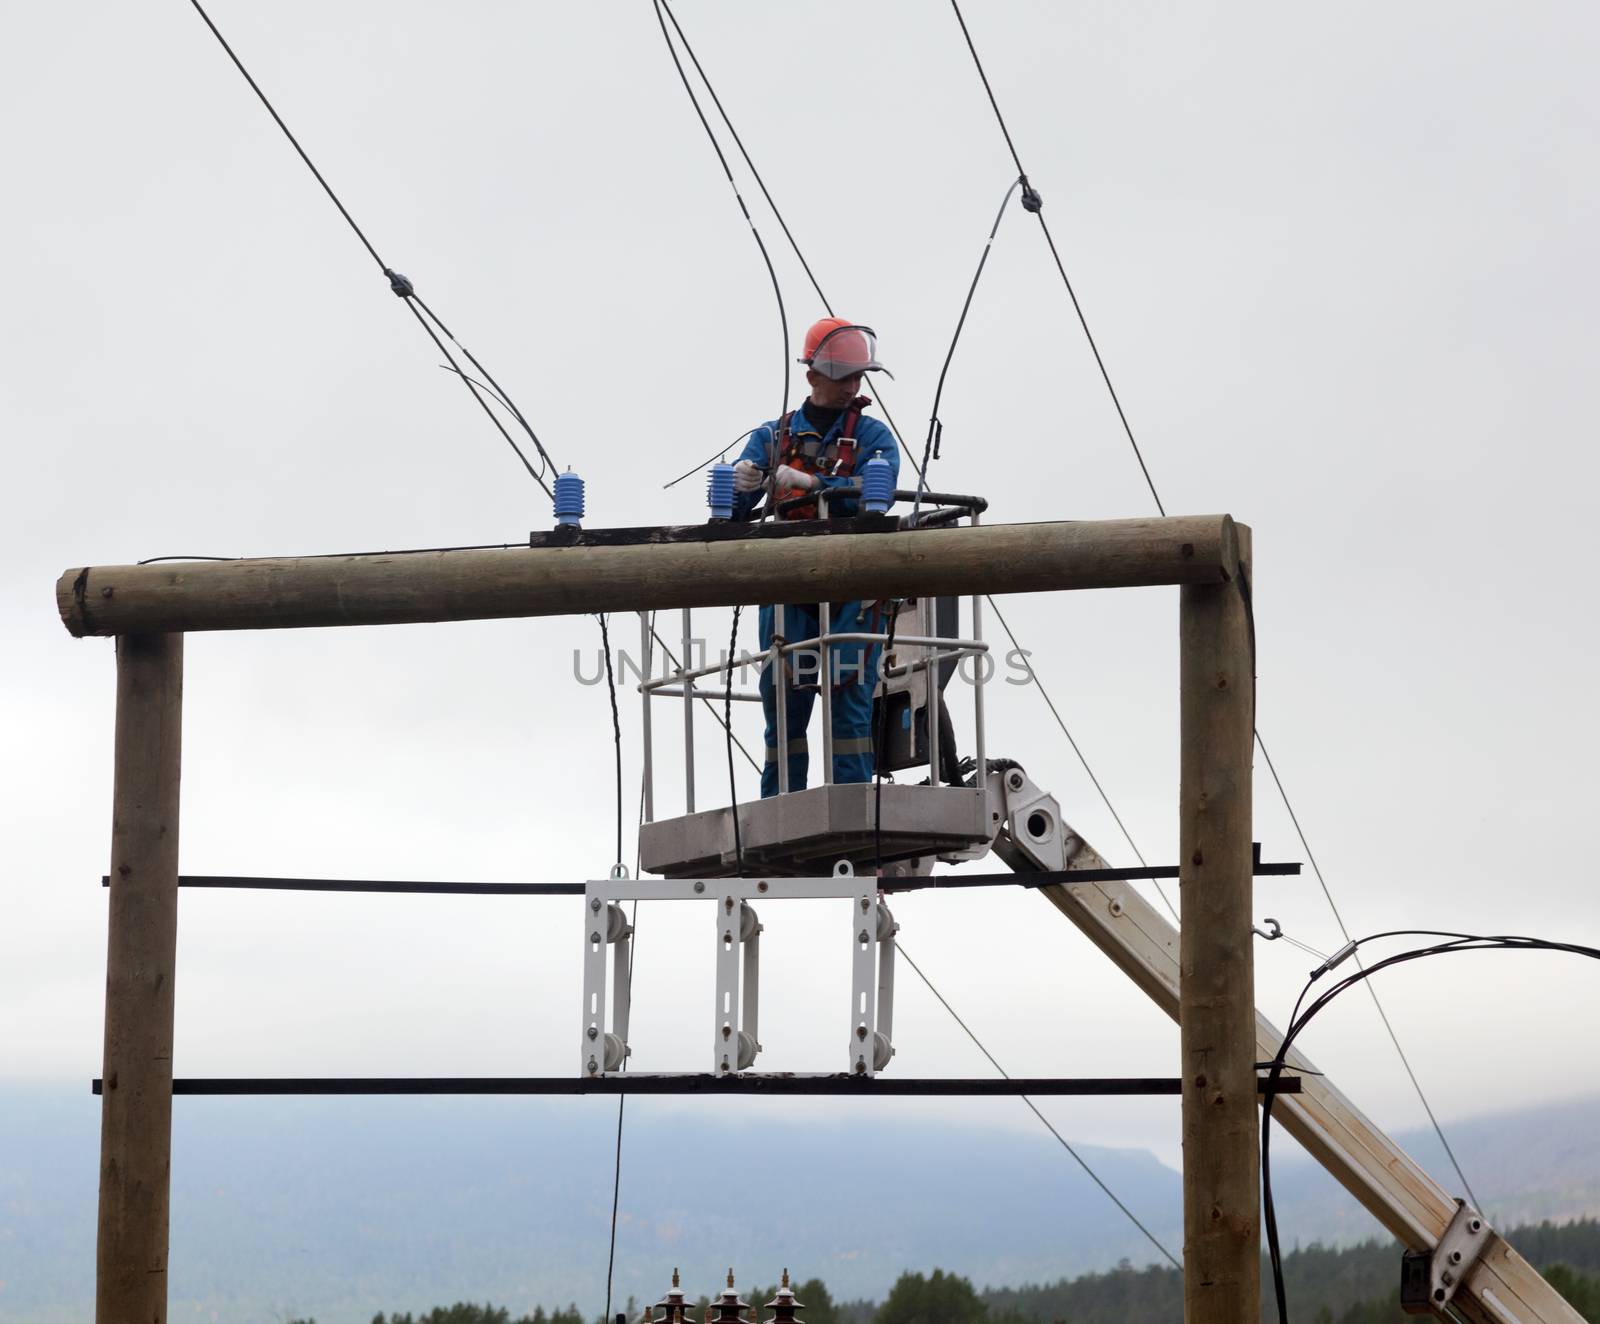 Electrician working at a power transmission line construction by AleksandrN